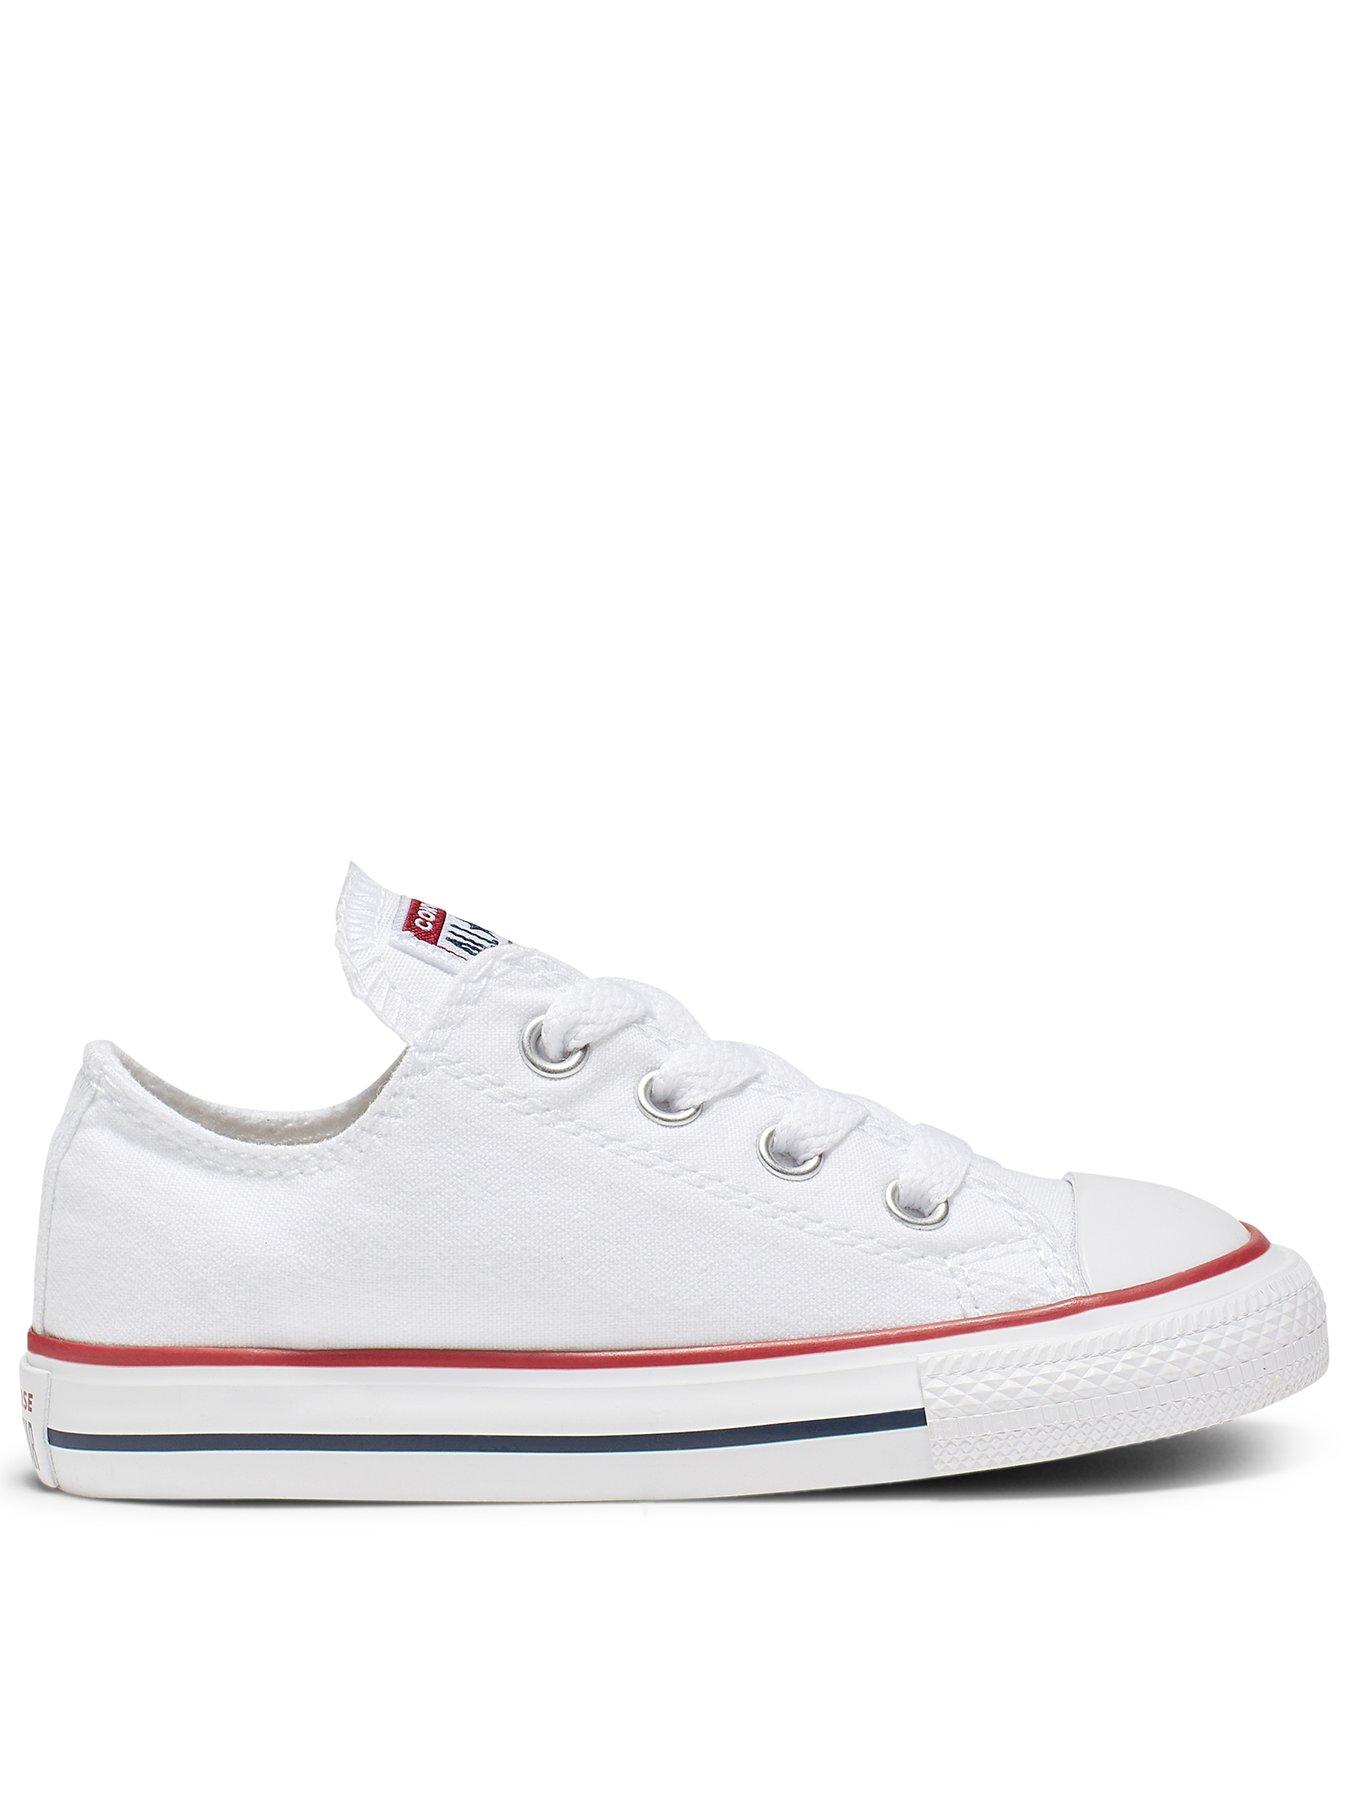 converse chef shoes